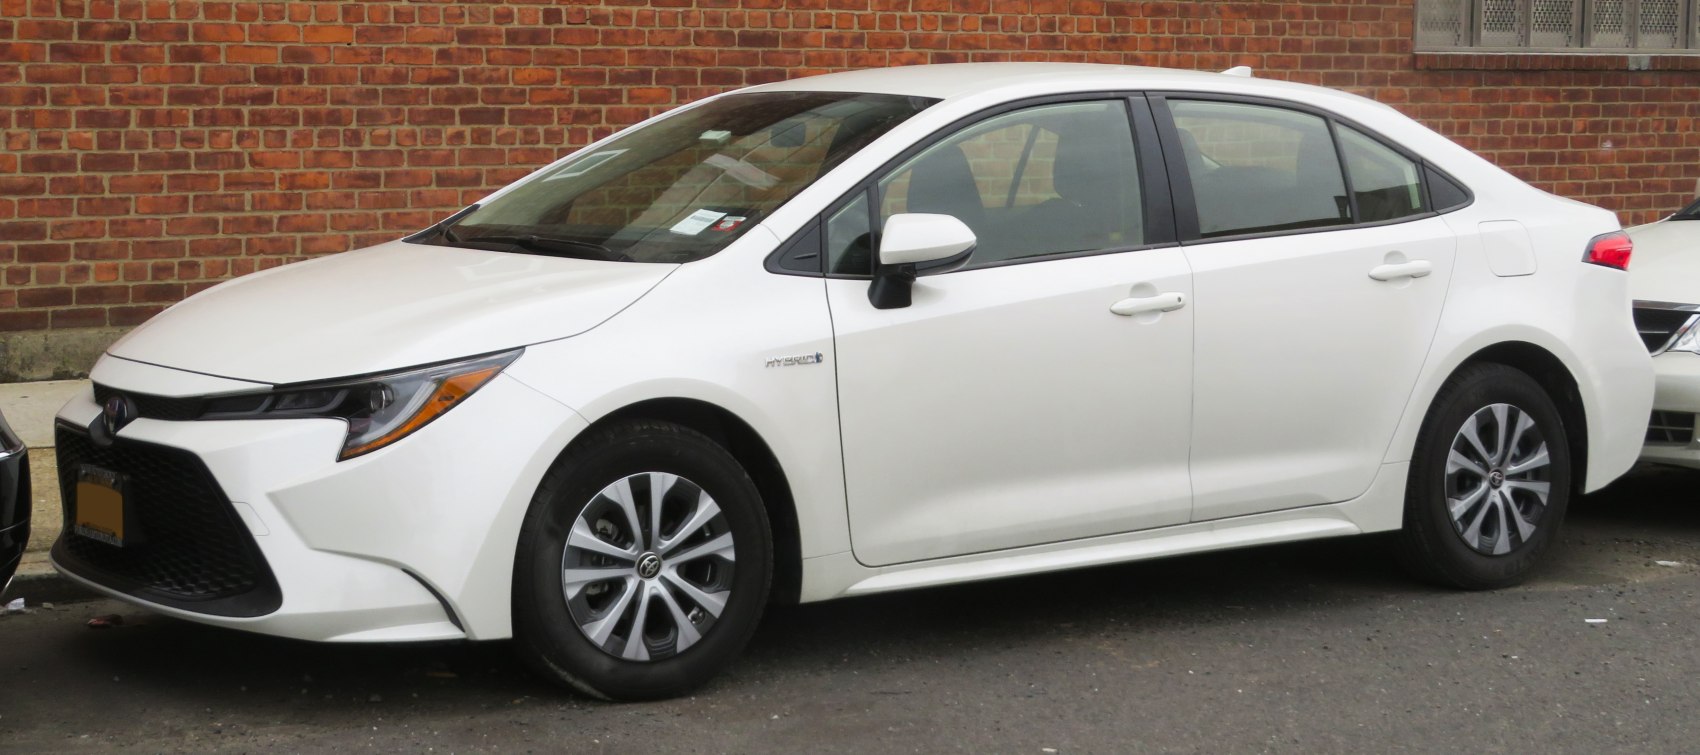 https://totalrenting.es/wp-content/uploads/2022/10/toyota-corolla-xii-e210-us-2020-2-0-169-cv-berlina.png